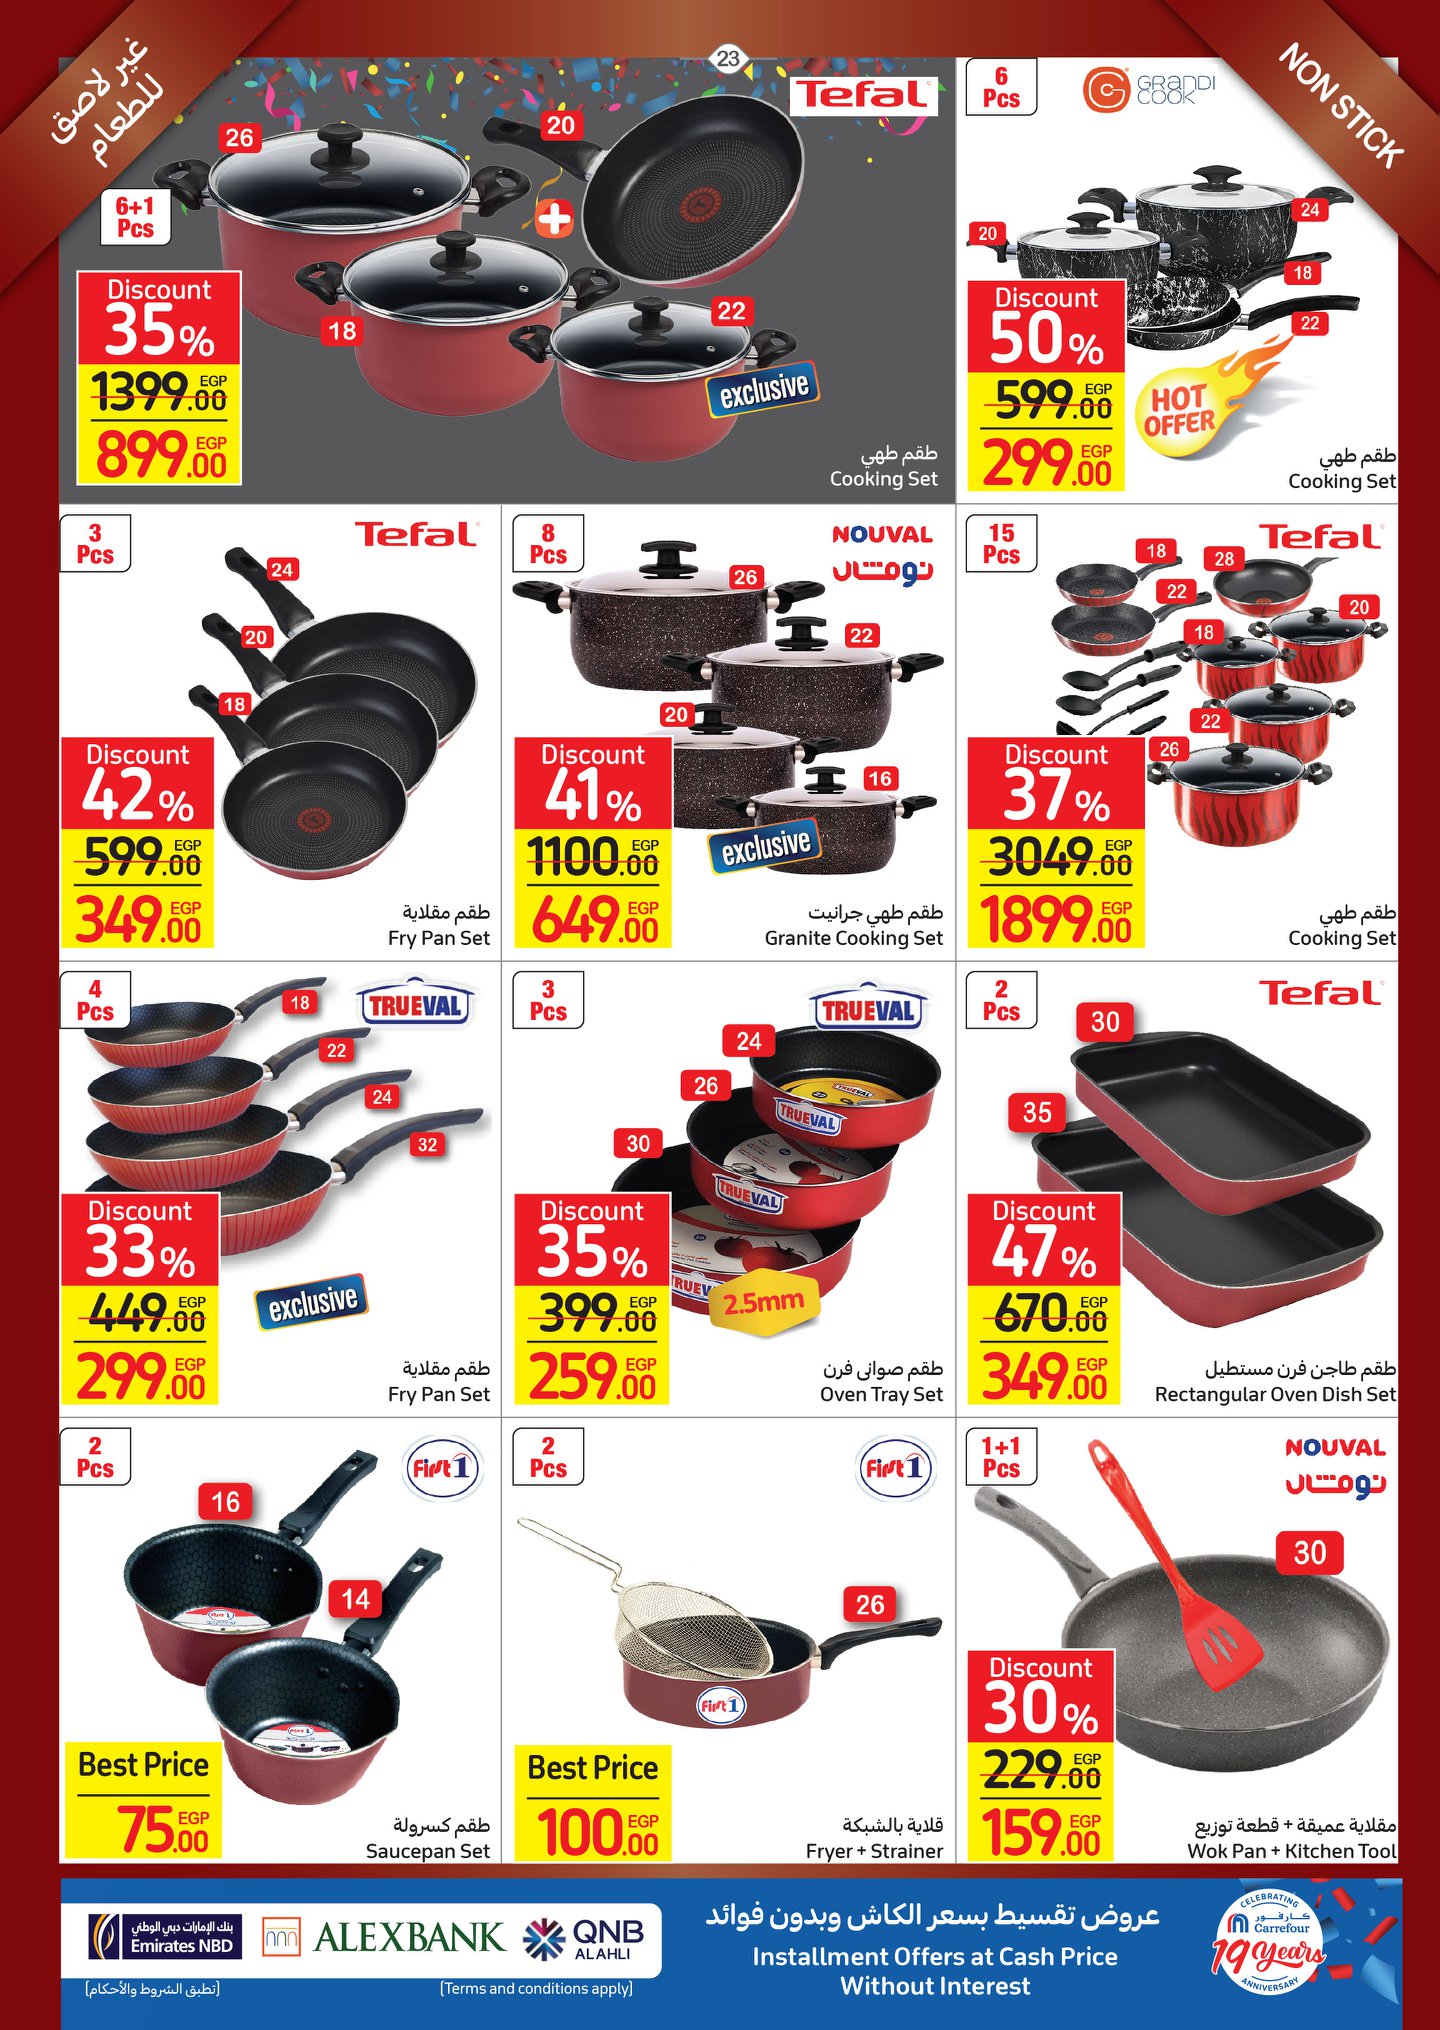 Carrefour magazine offers complete with 50% discounts and a surprise purchase in convenient installments without interest 28